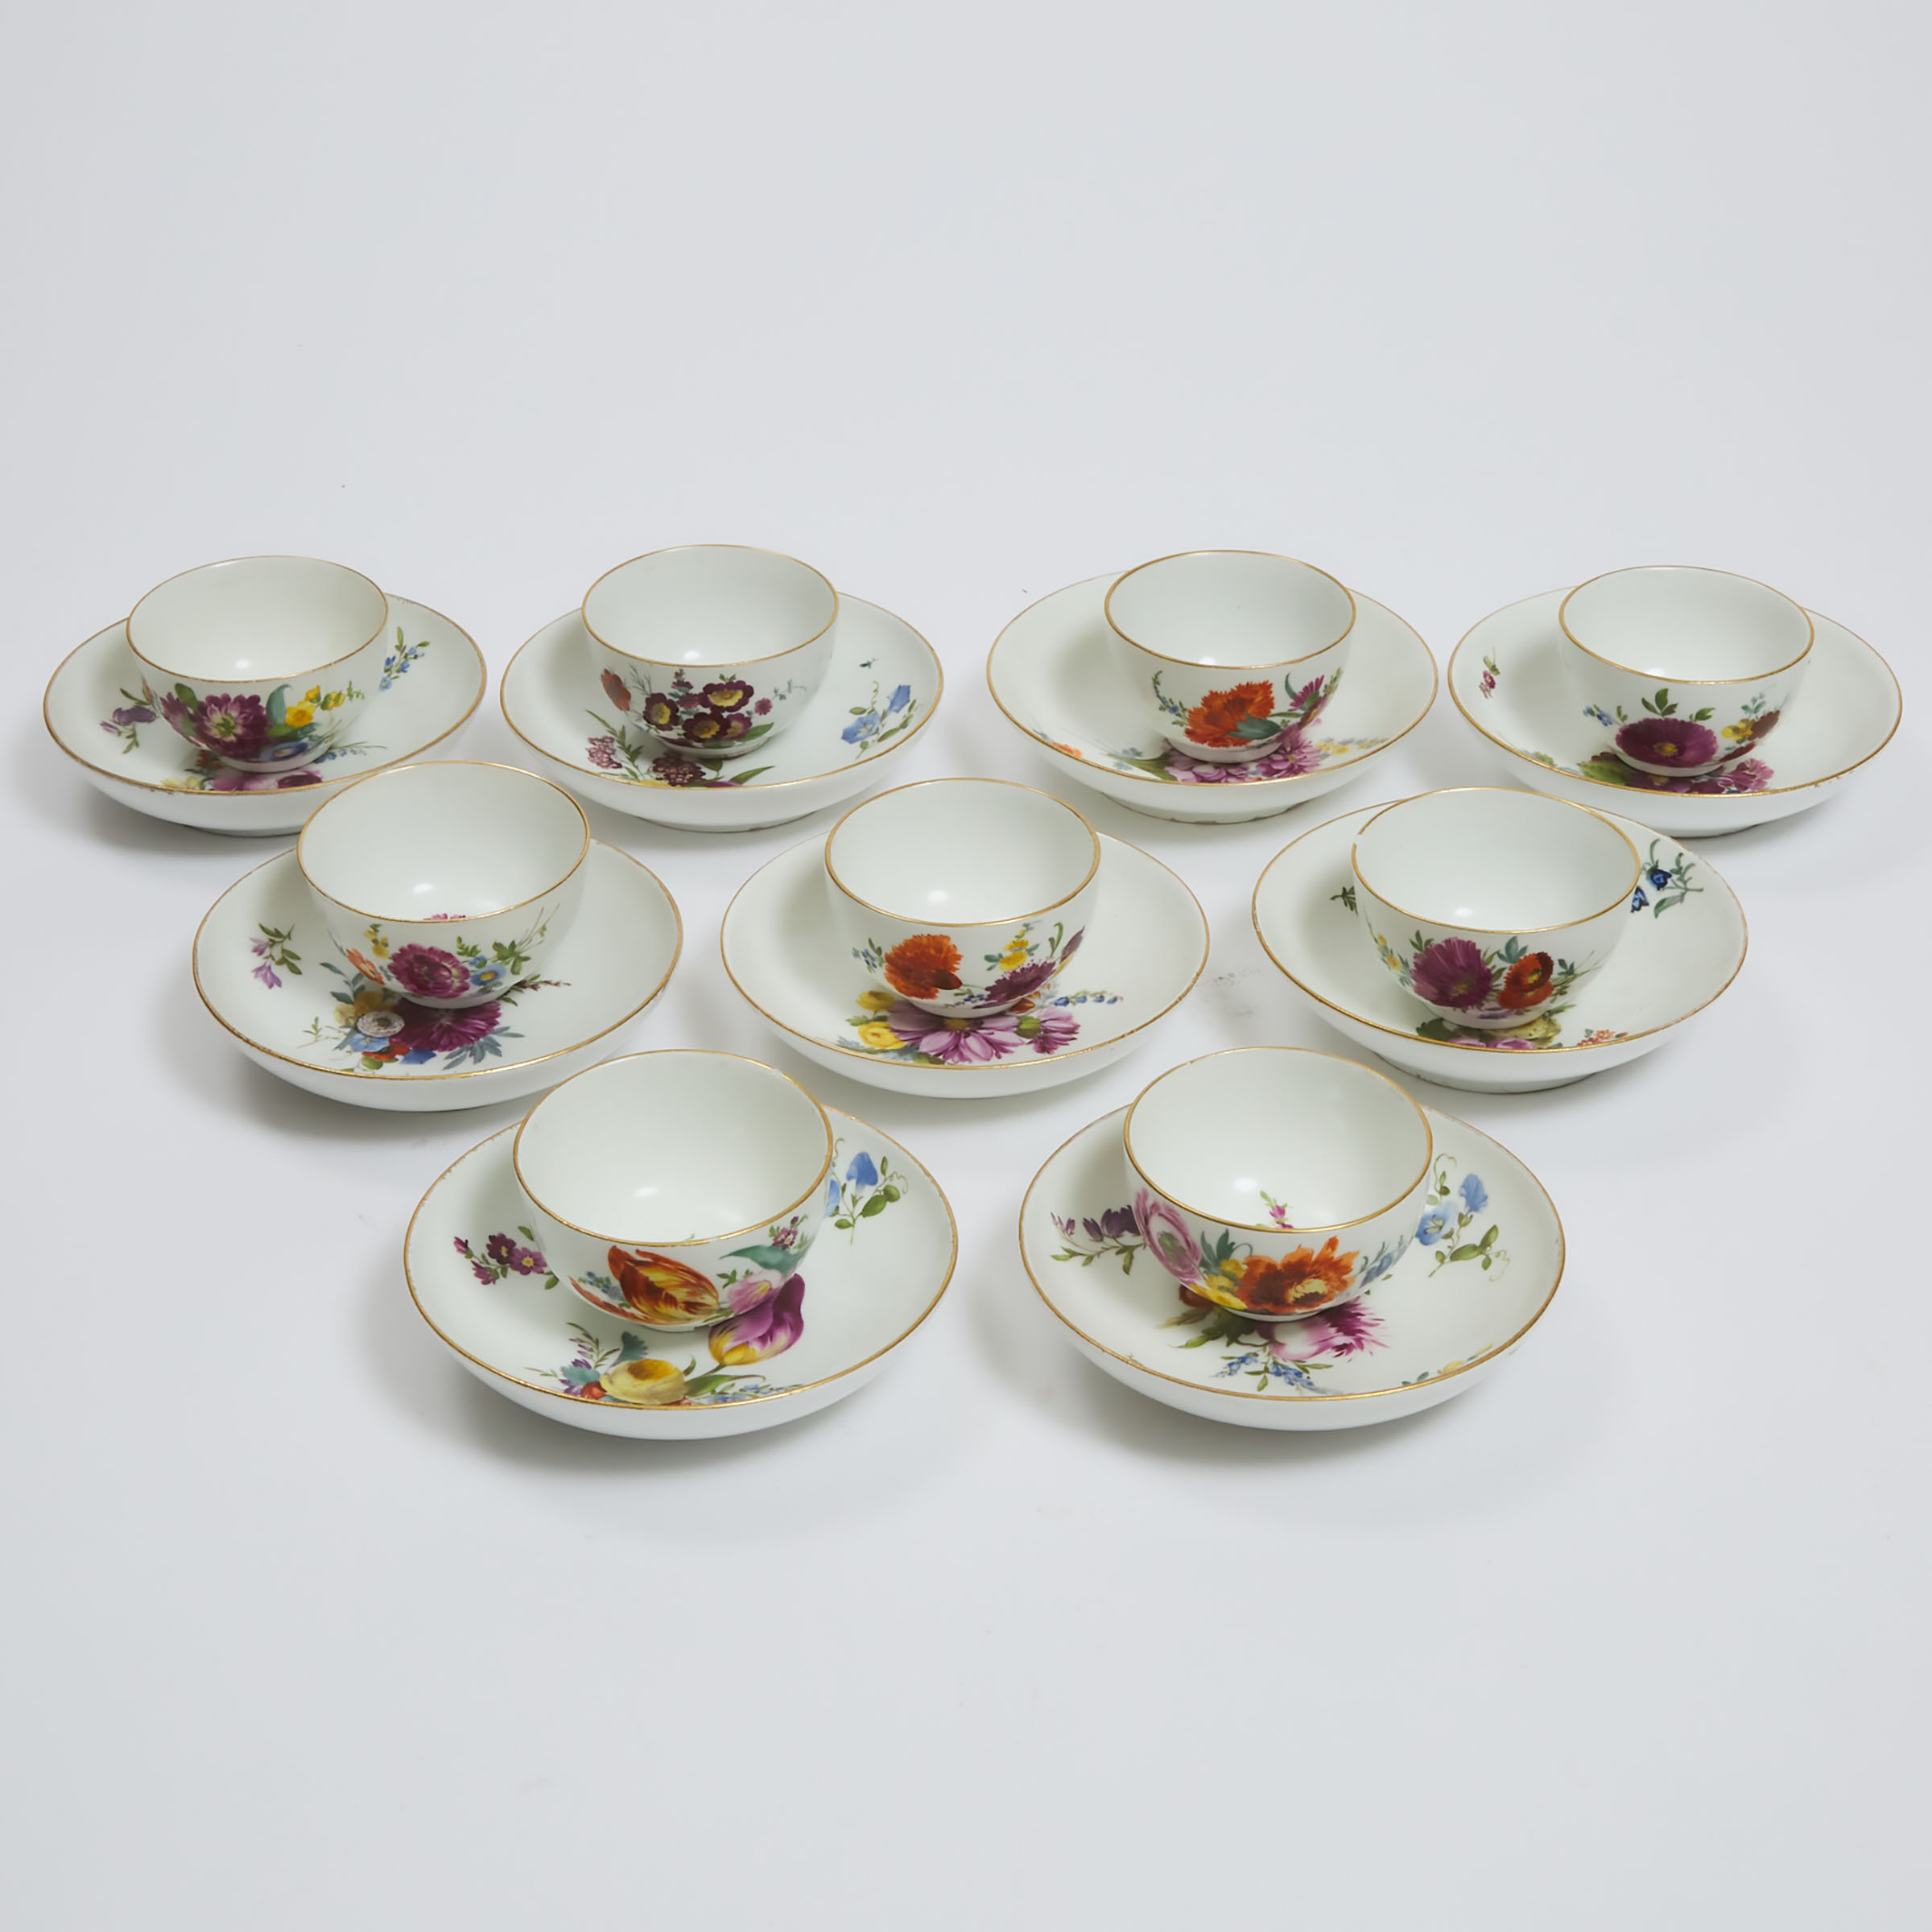 Nine Meissen Flower Painted Tea Bowls and Saucers, late 18th century